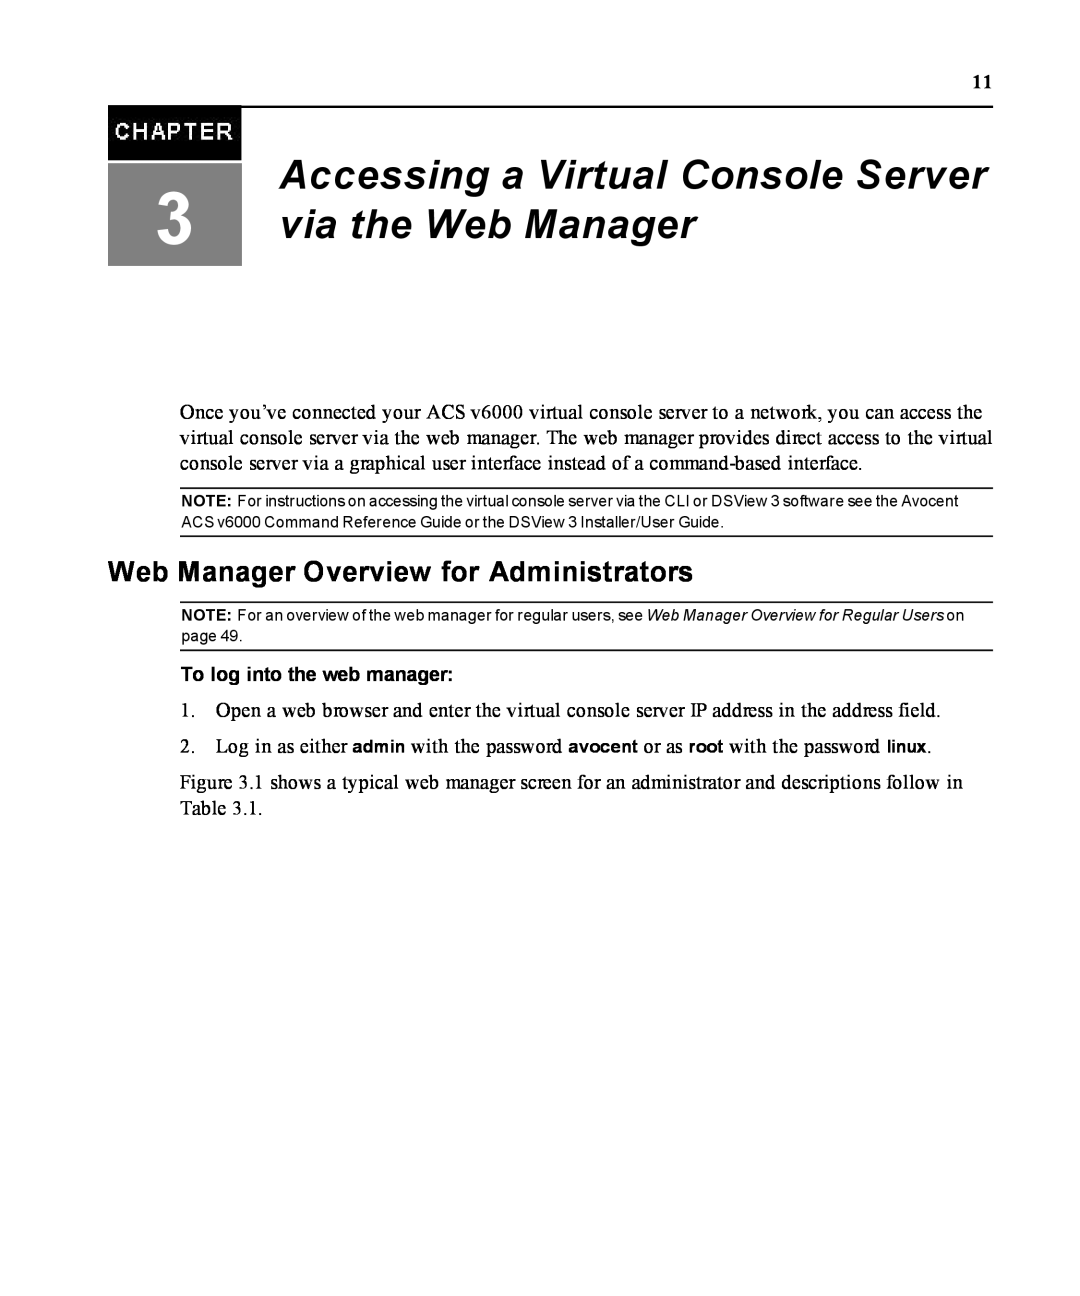 Casio ACS V6000 manual Accessing a Virtual Console Server 3 via the Web Manager, Web Manager Overview for Administrators 